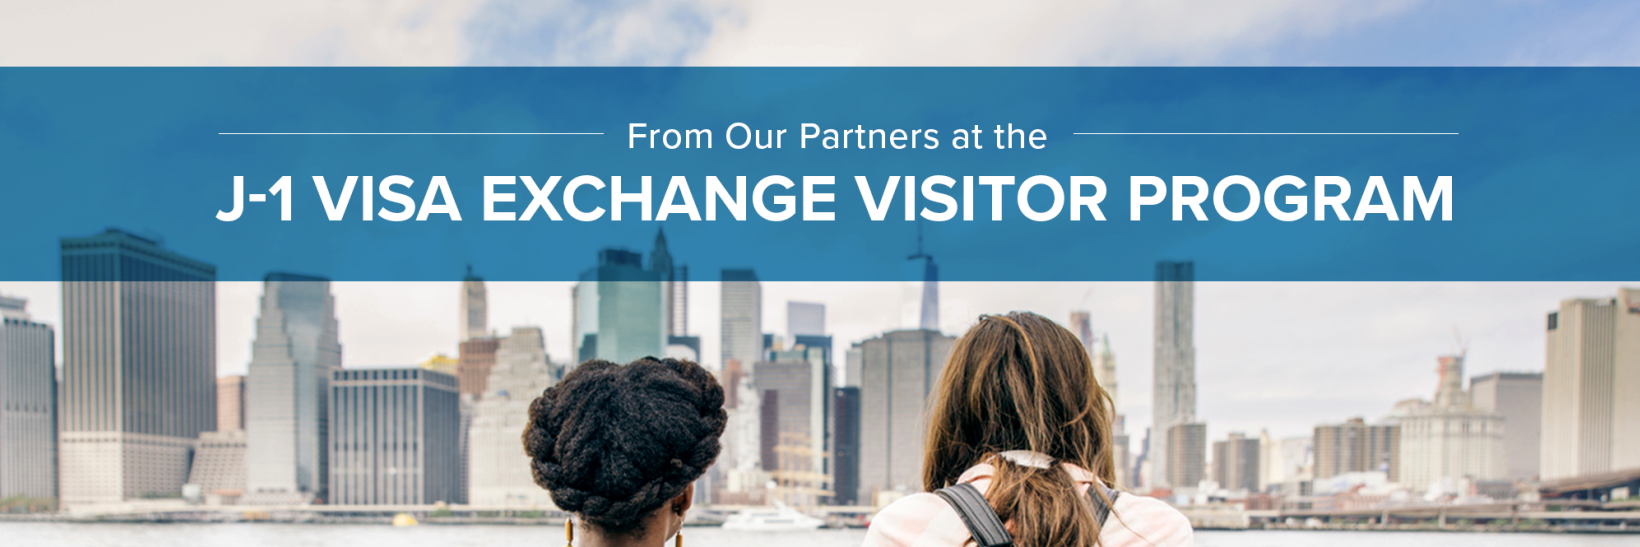 From our Partners at the J-1 Visa Exchange Visitor Program